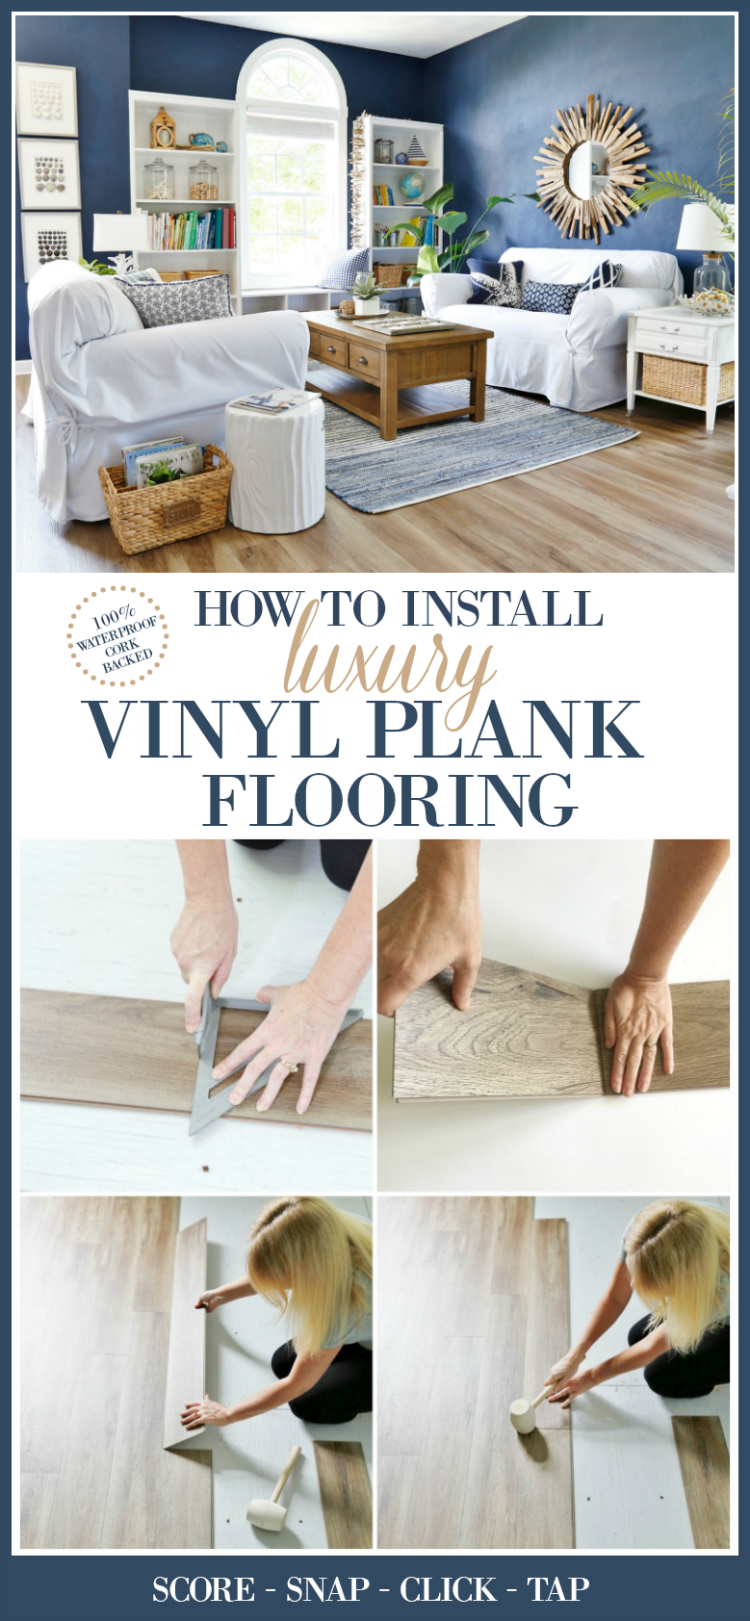 How to Install Luxury Vinyl Plank Flooring. This 100% waterproof, cork backed flooring is easy to install for a DIY-er, requires no nails or glue, and has a lifetime warranty!